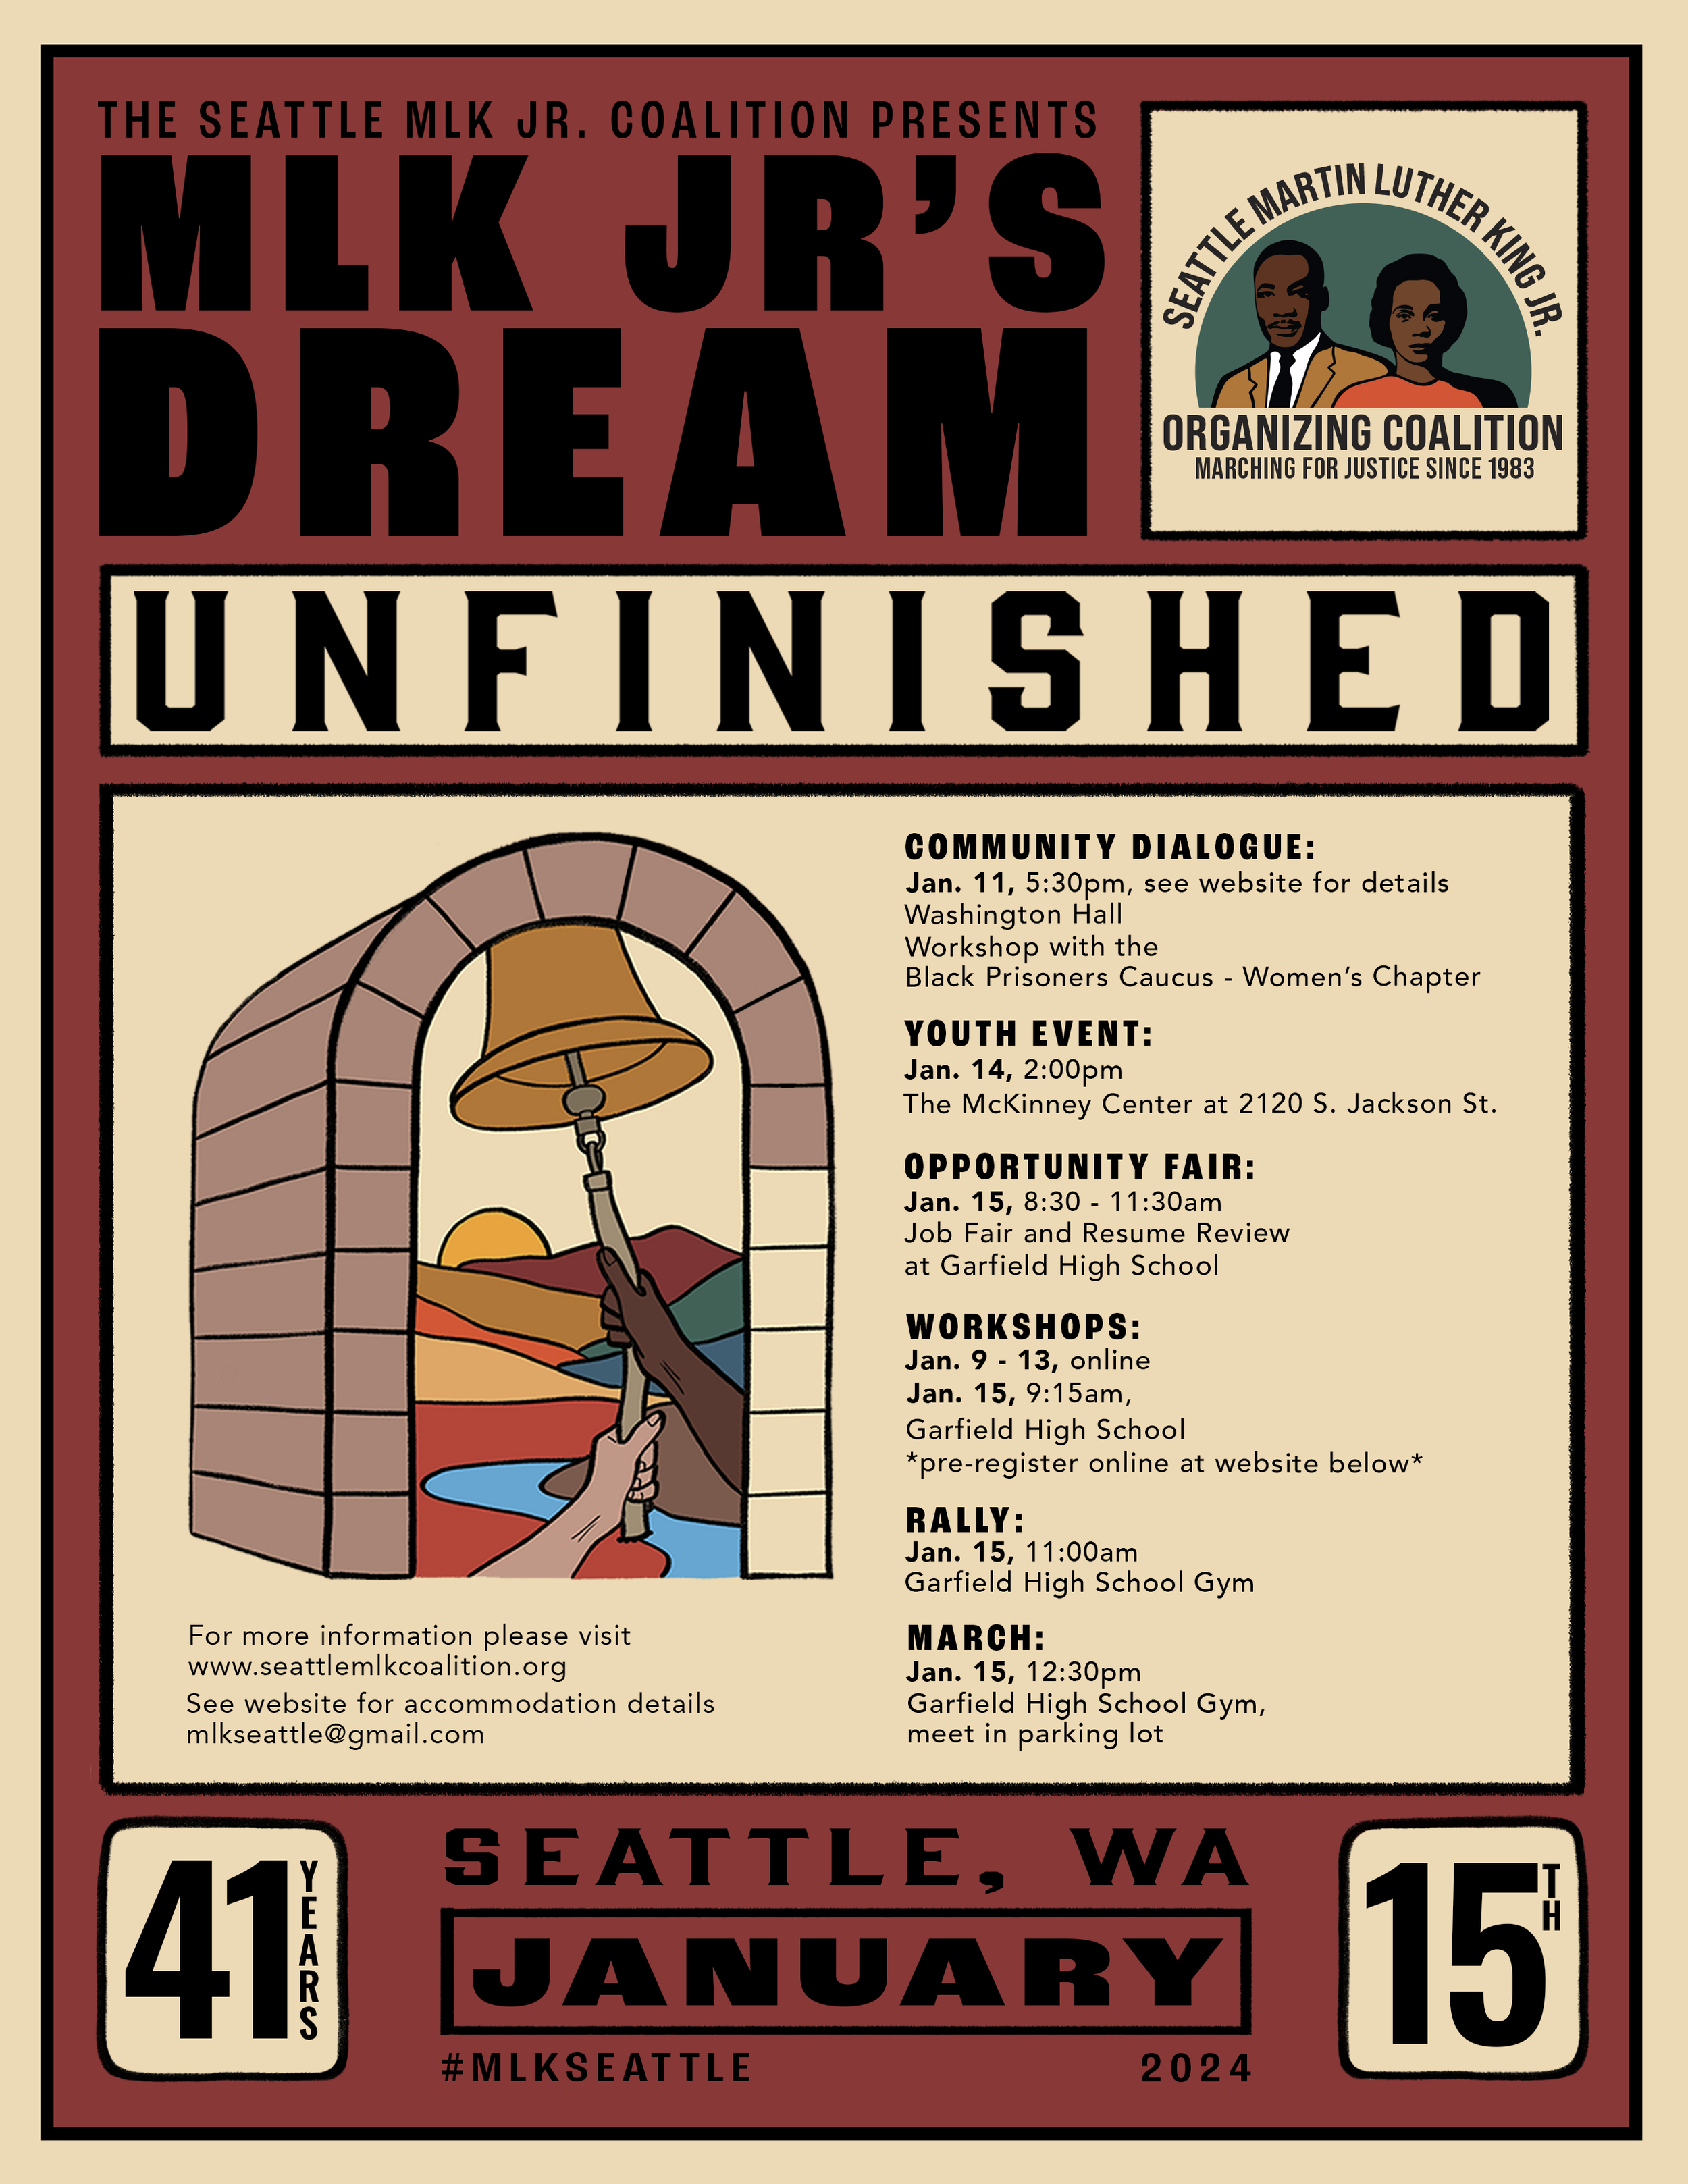 Flyer showing time and schedule of Seattle MLK Coalition events for 2024